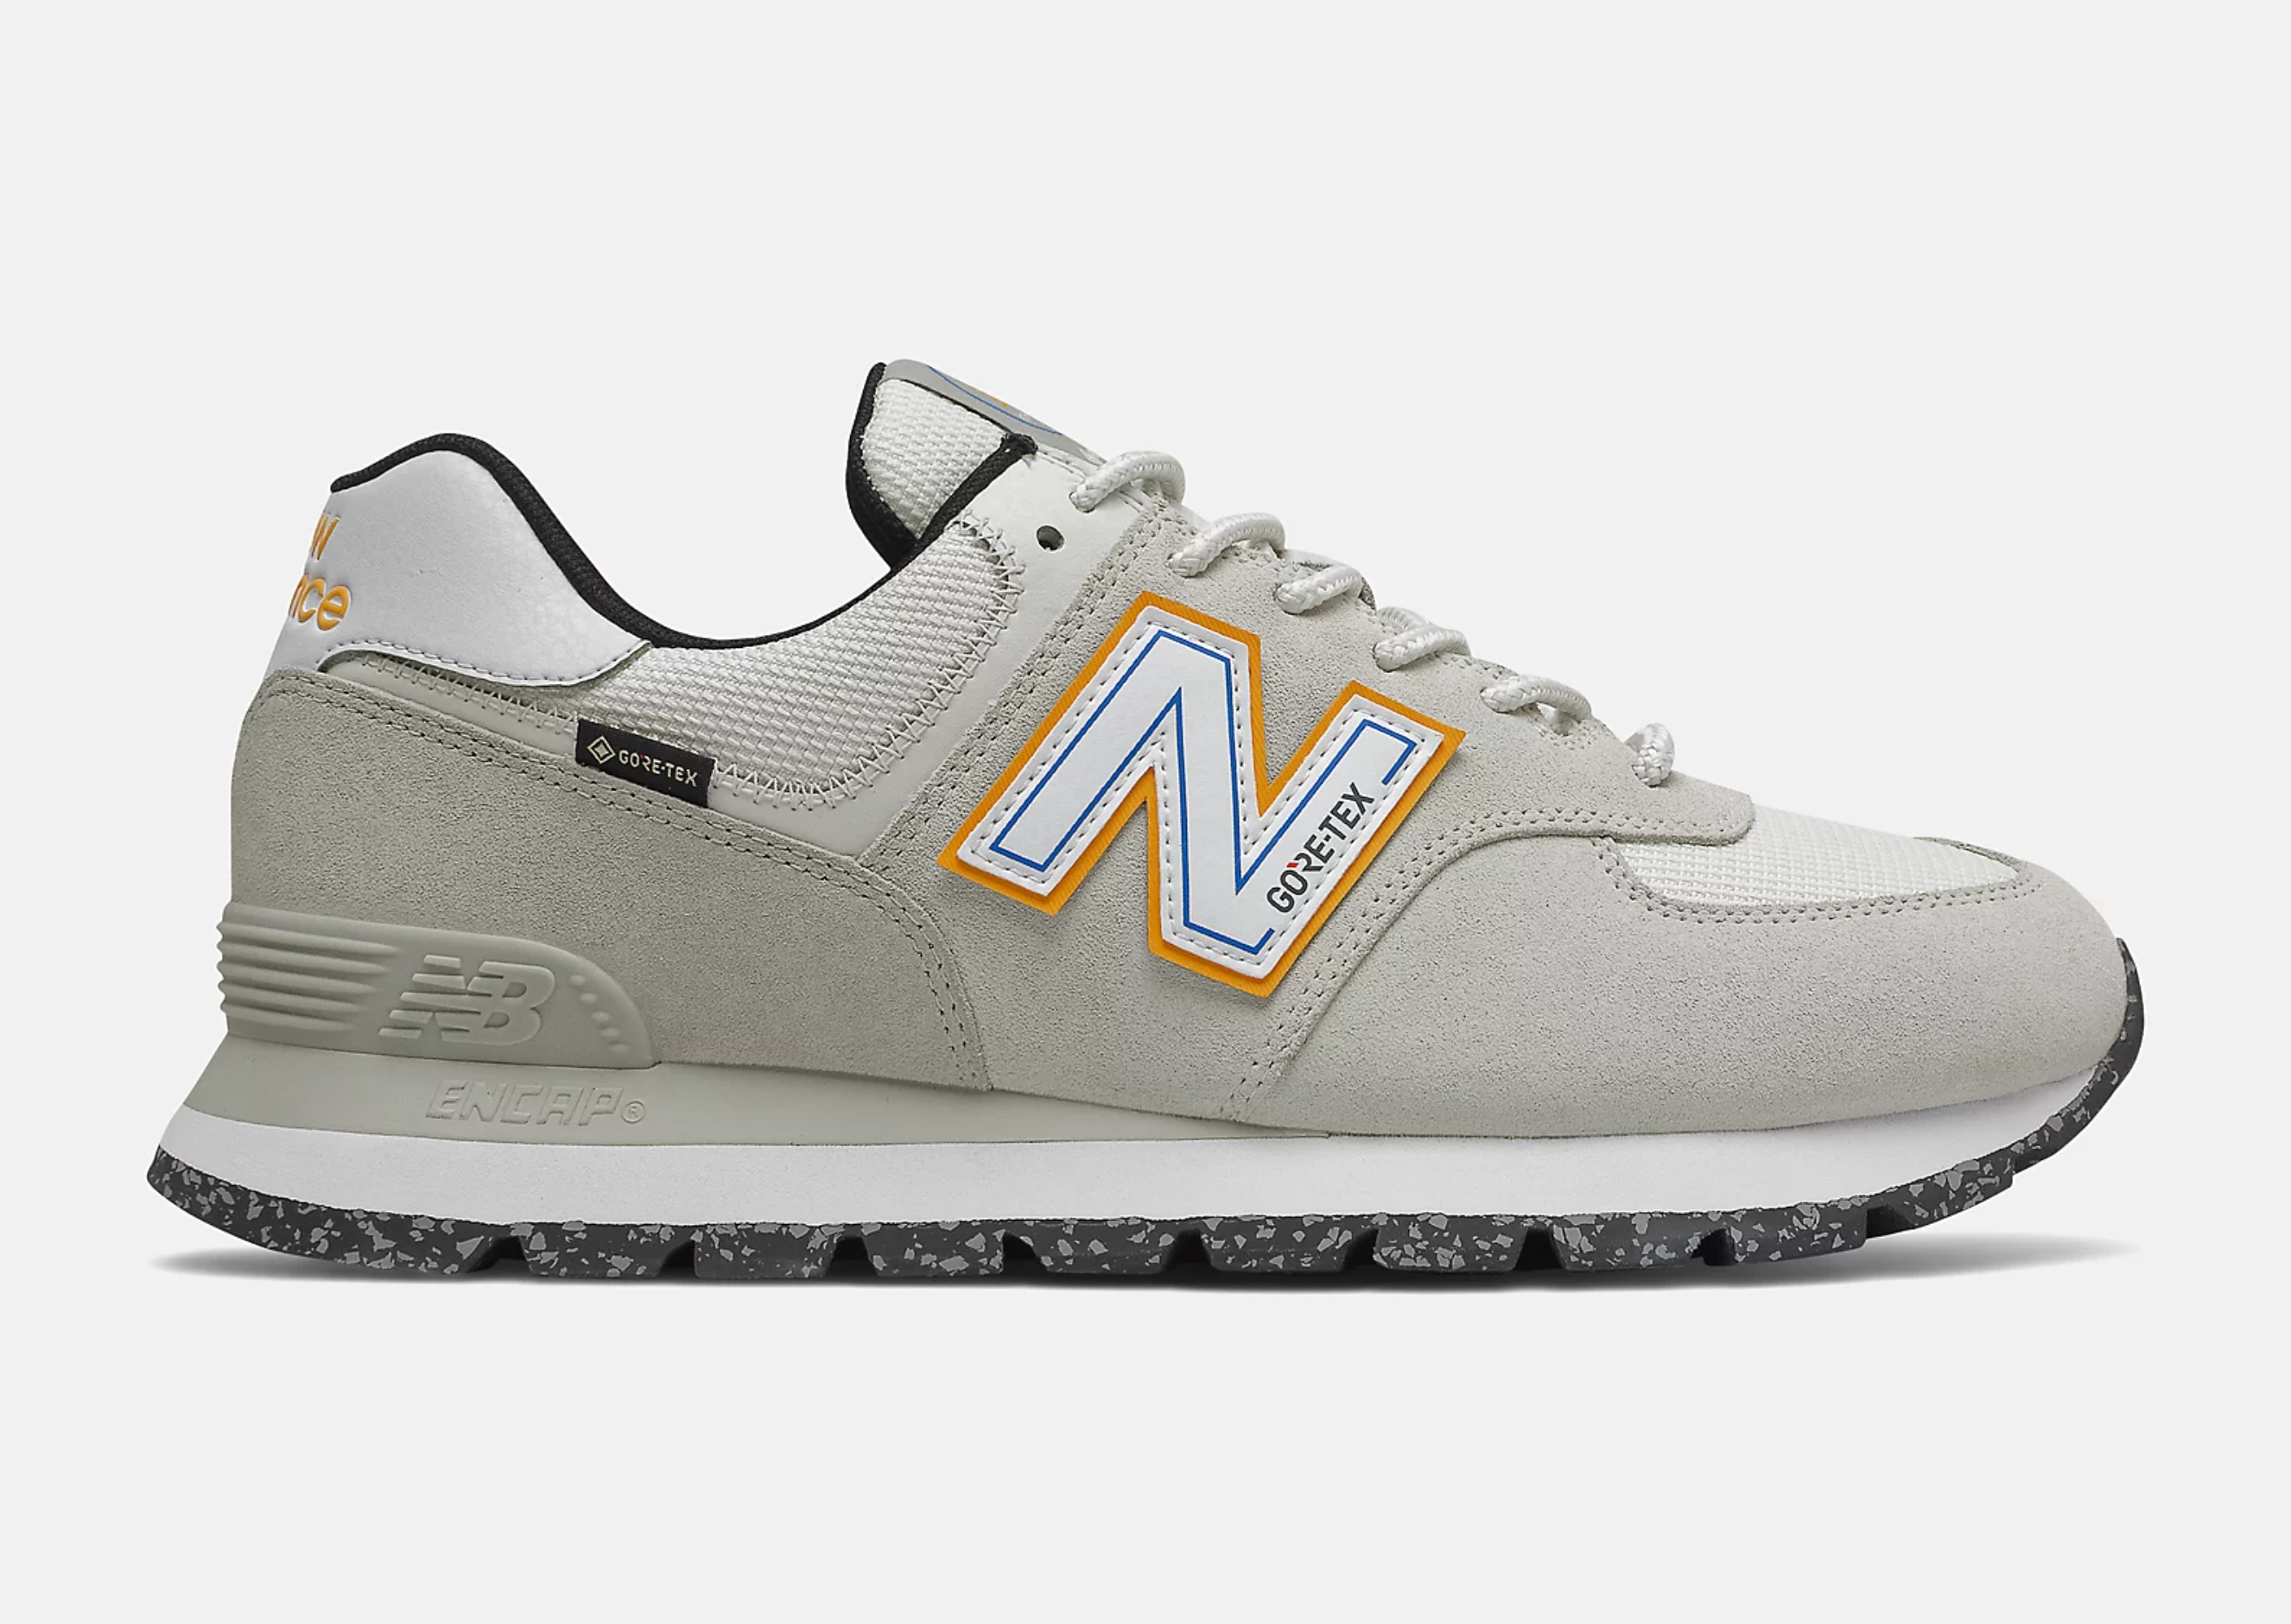 The New Balance 574 Gets Infused with GORE-TEX - Sneaker Freaker